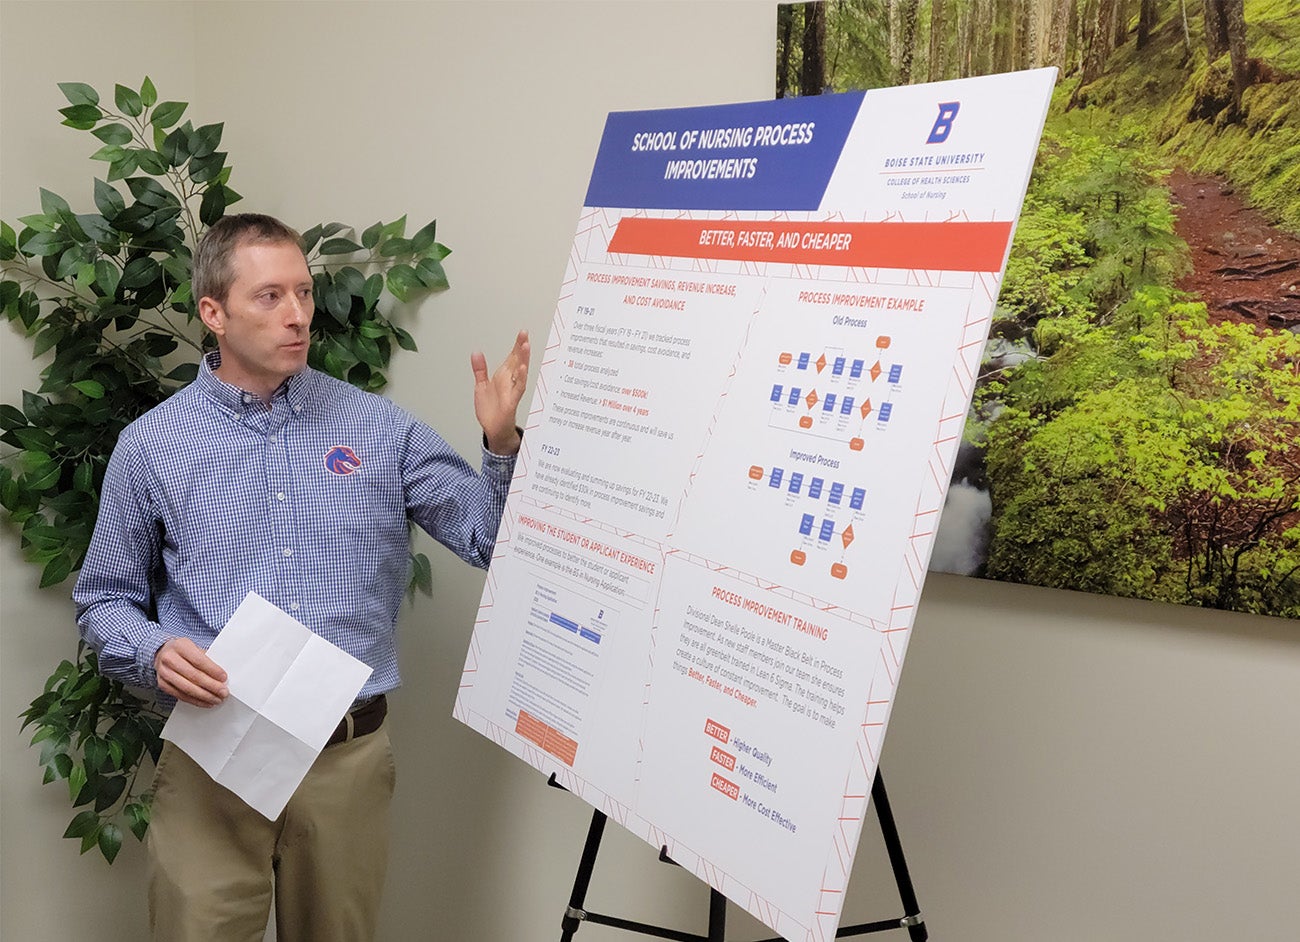 A man points to a research poster entitled "School of Nursing Process Improvements"